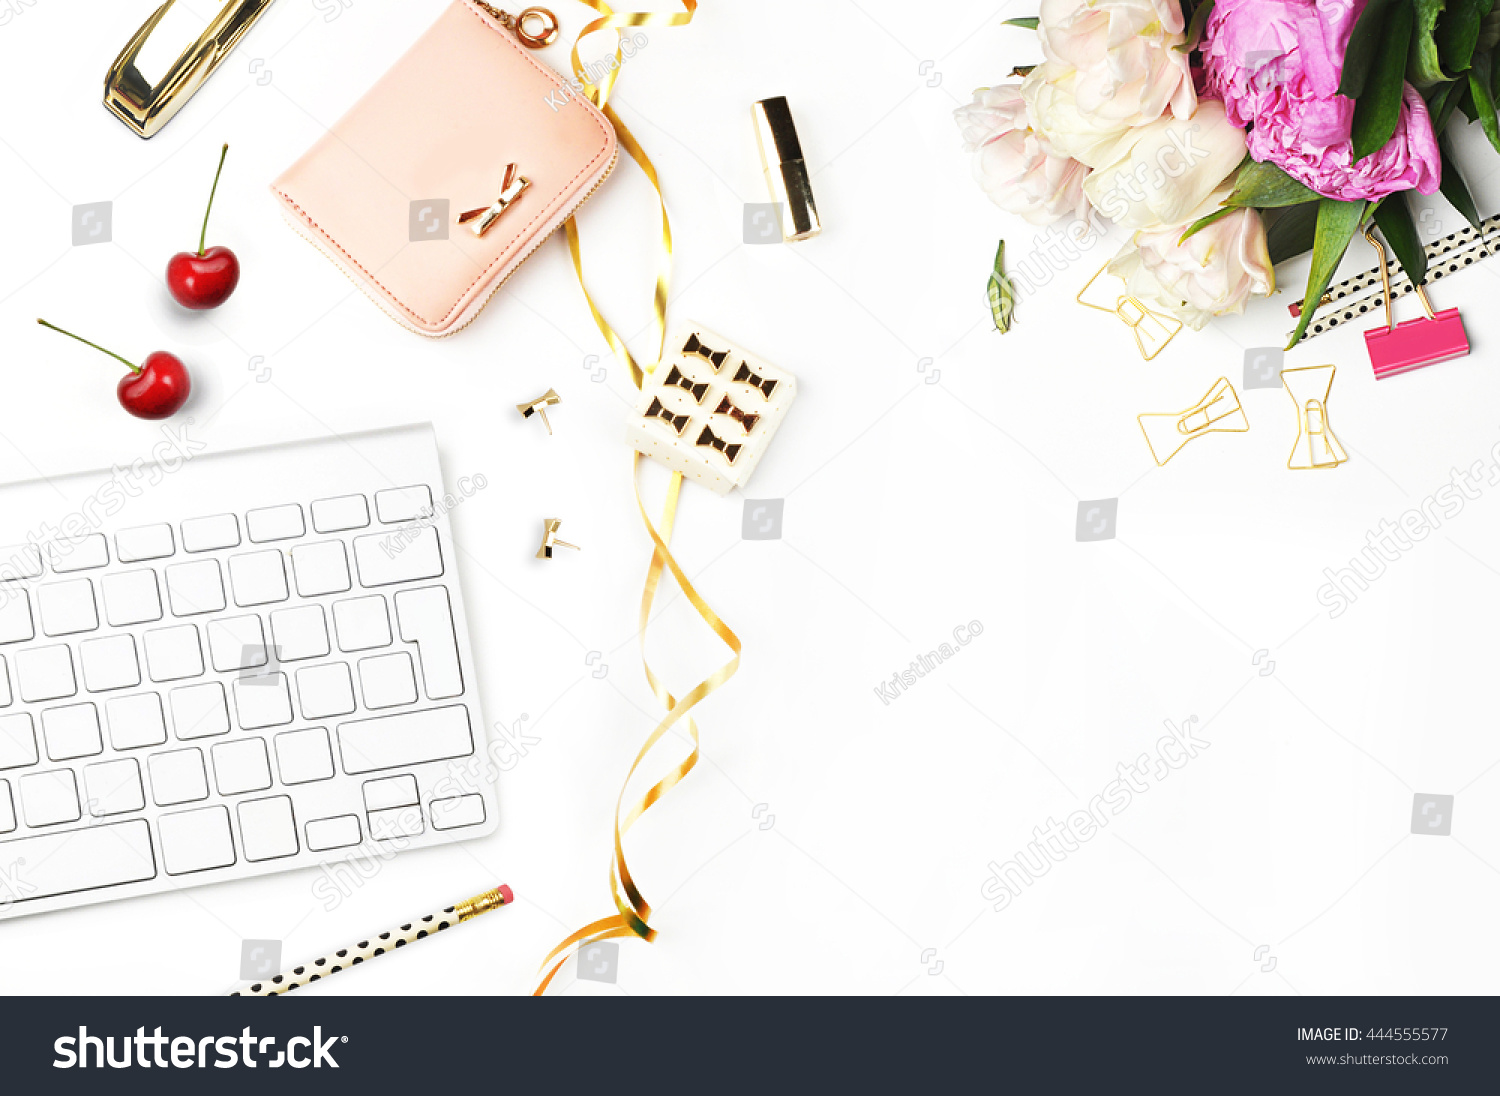 Edit Pictures Free Online - Table view | Shutterstock Editor